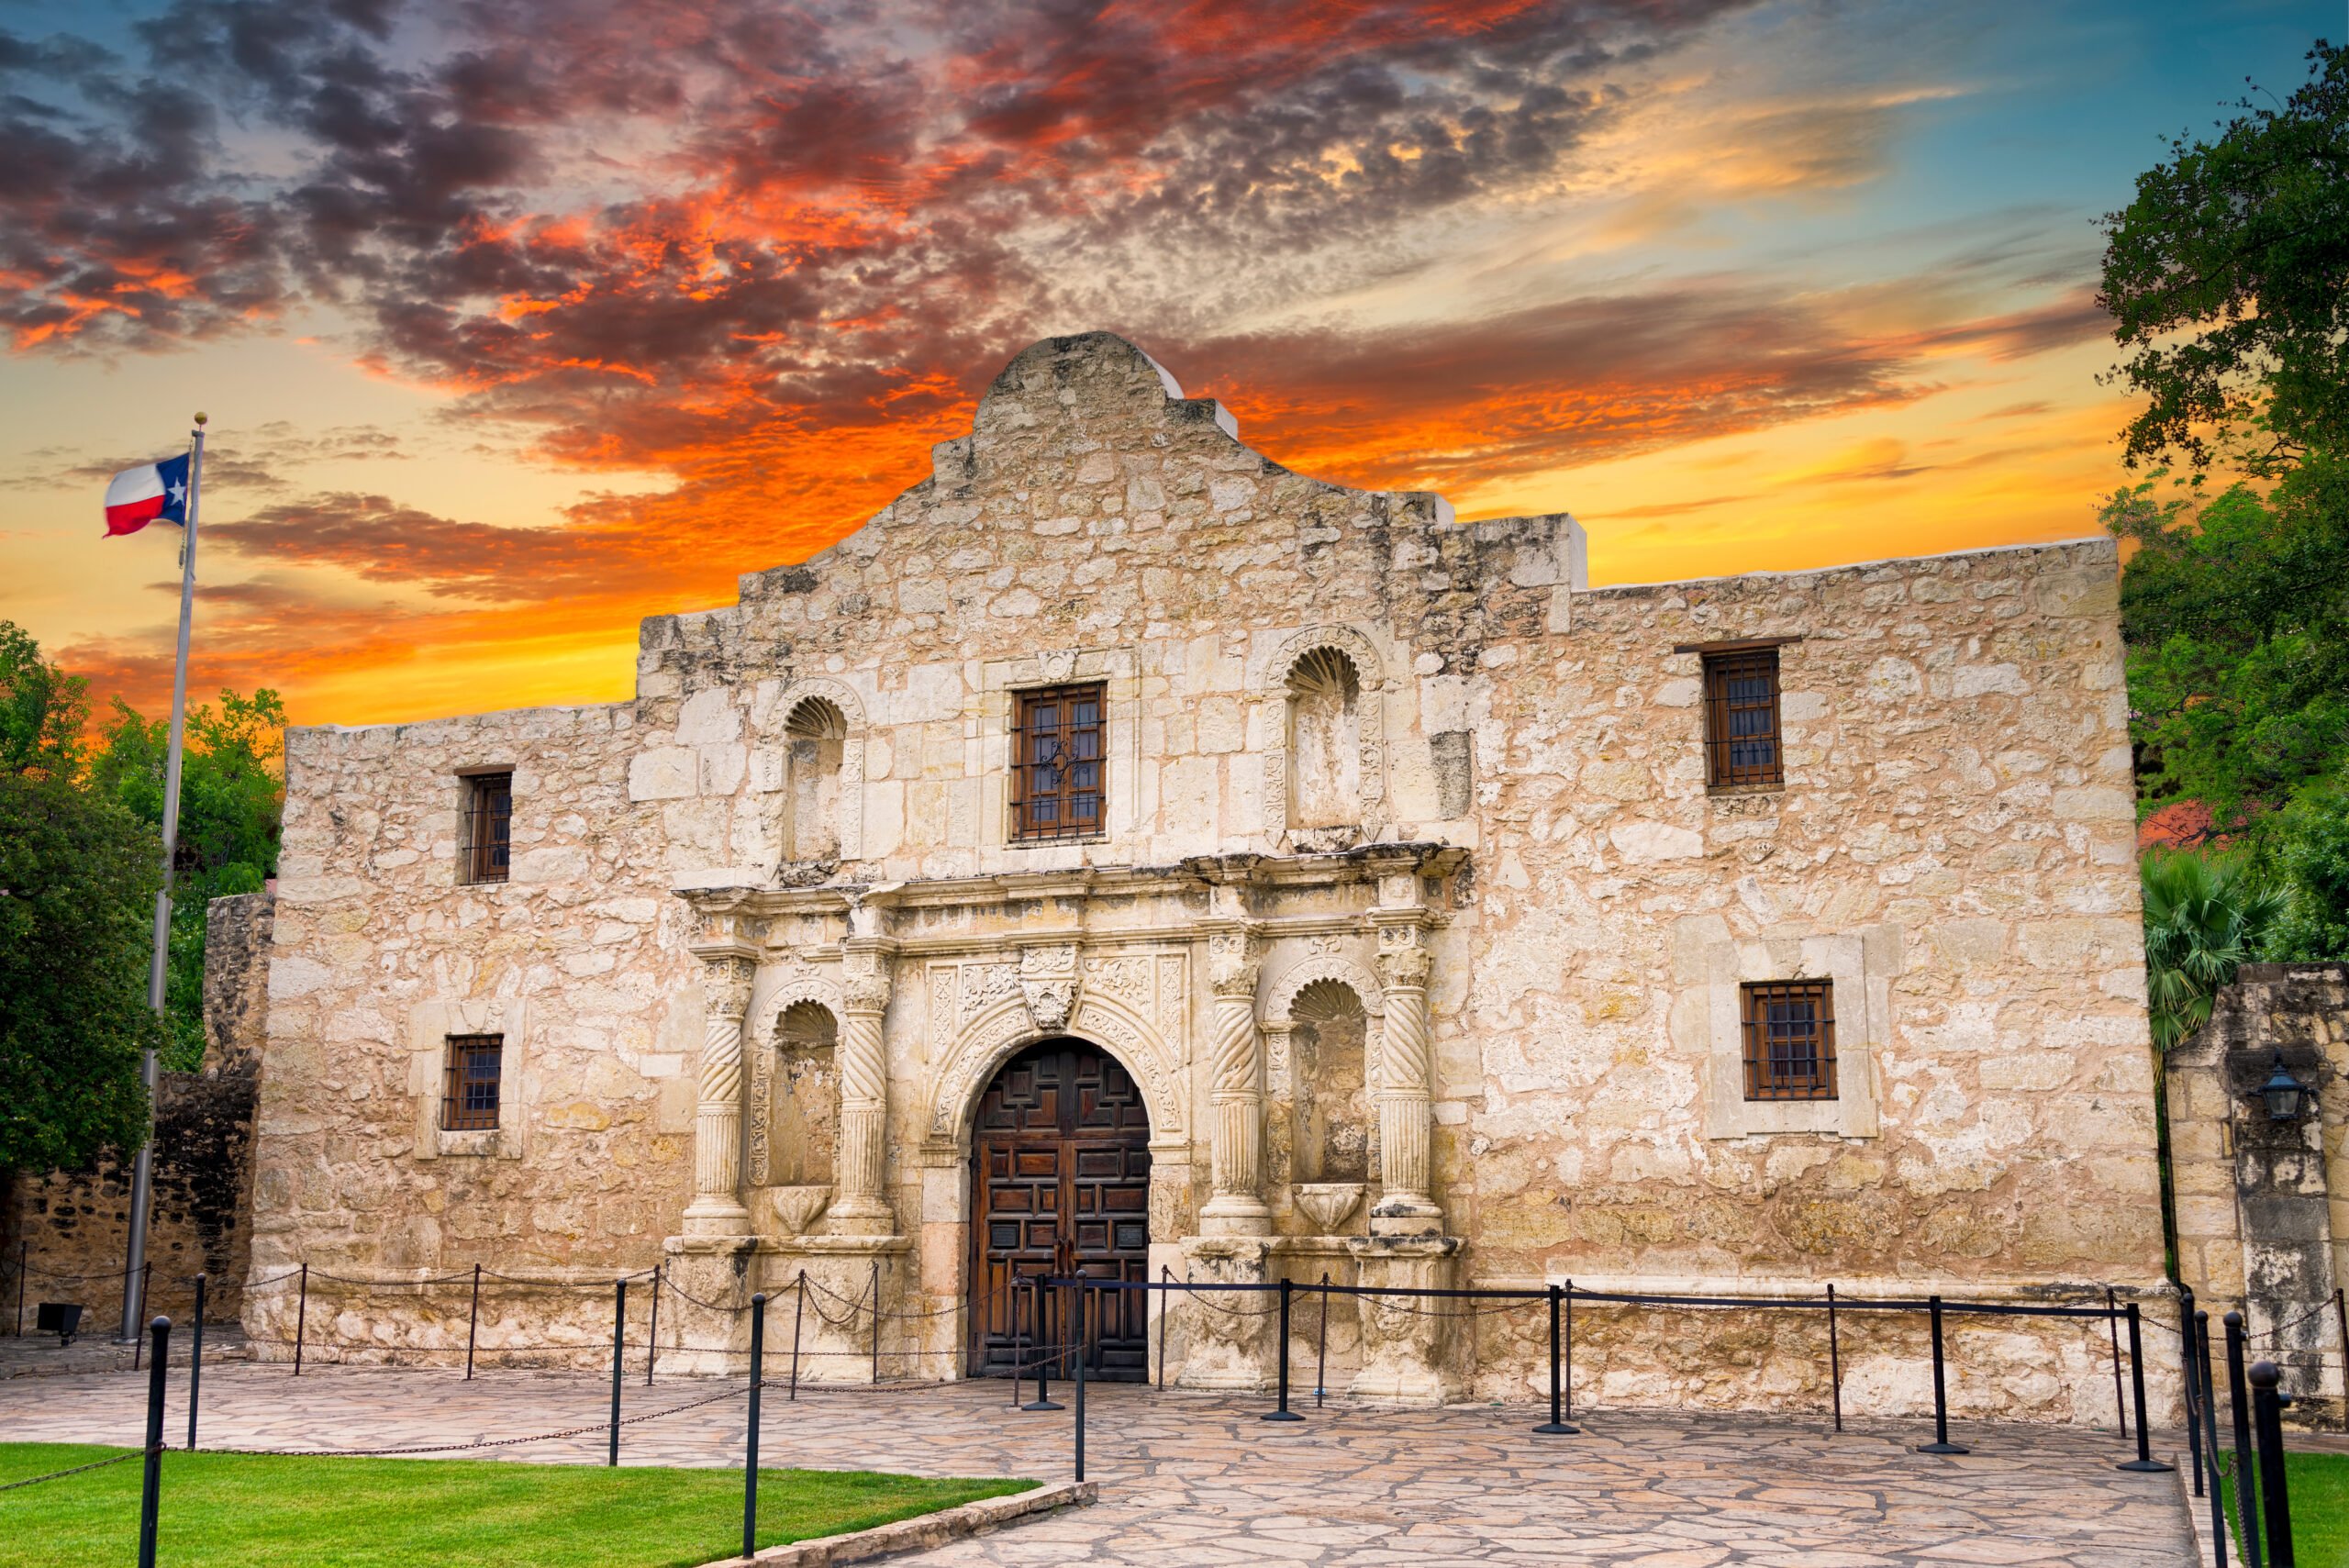 The Alamo — The Site of One of America’s Most Historic Battles